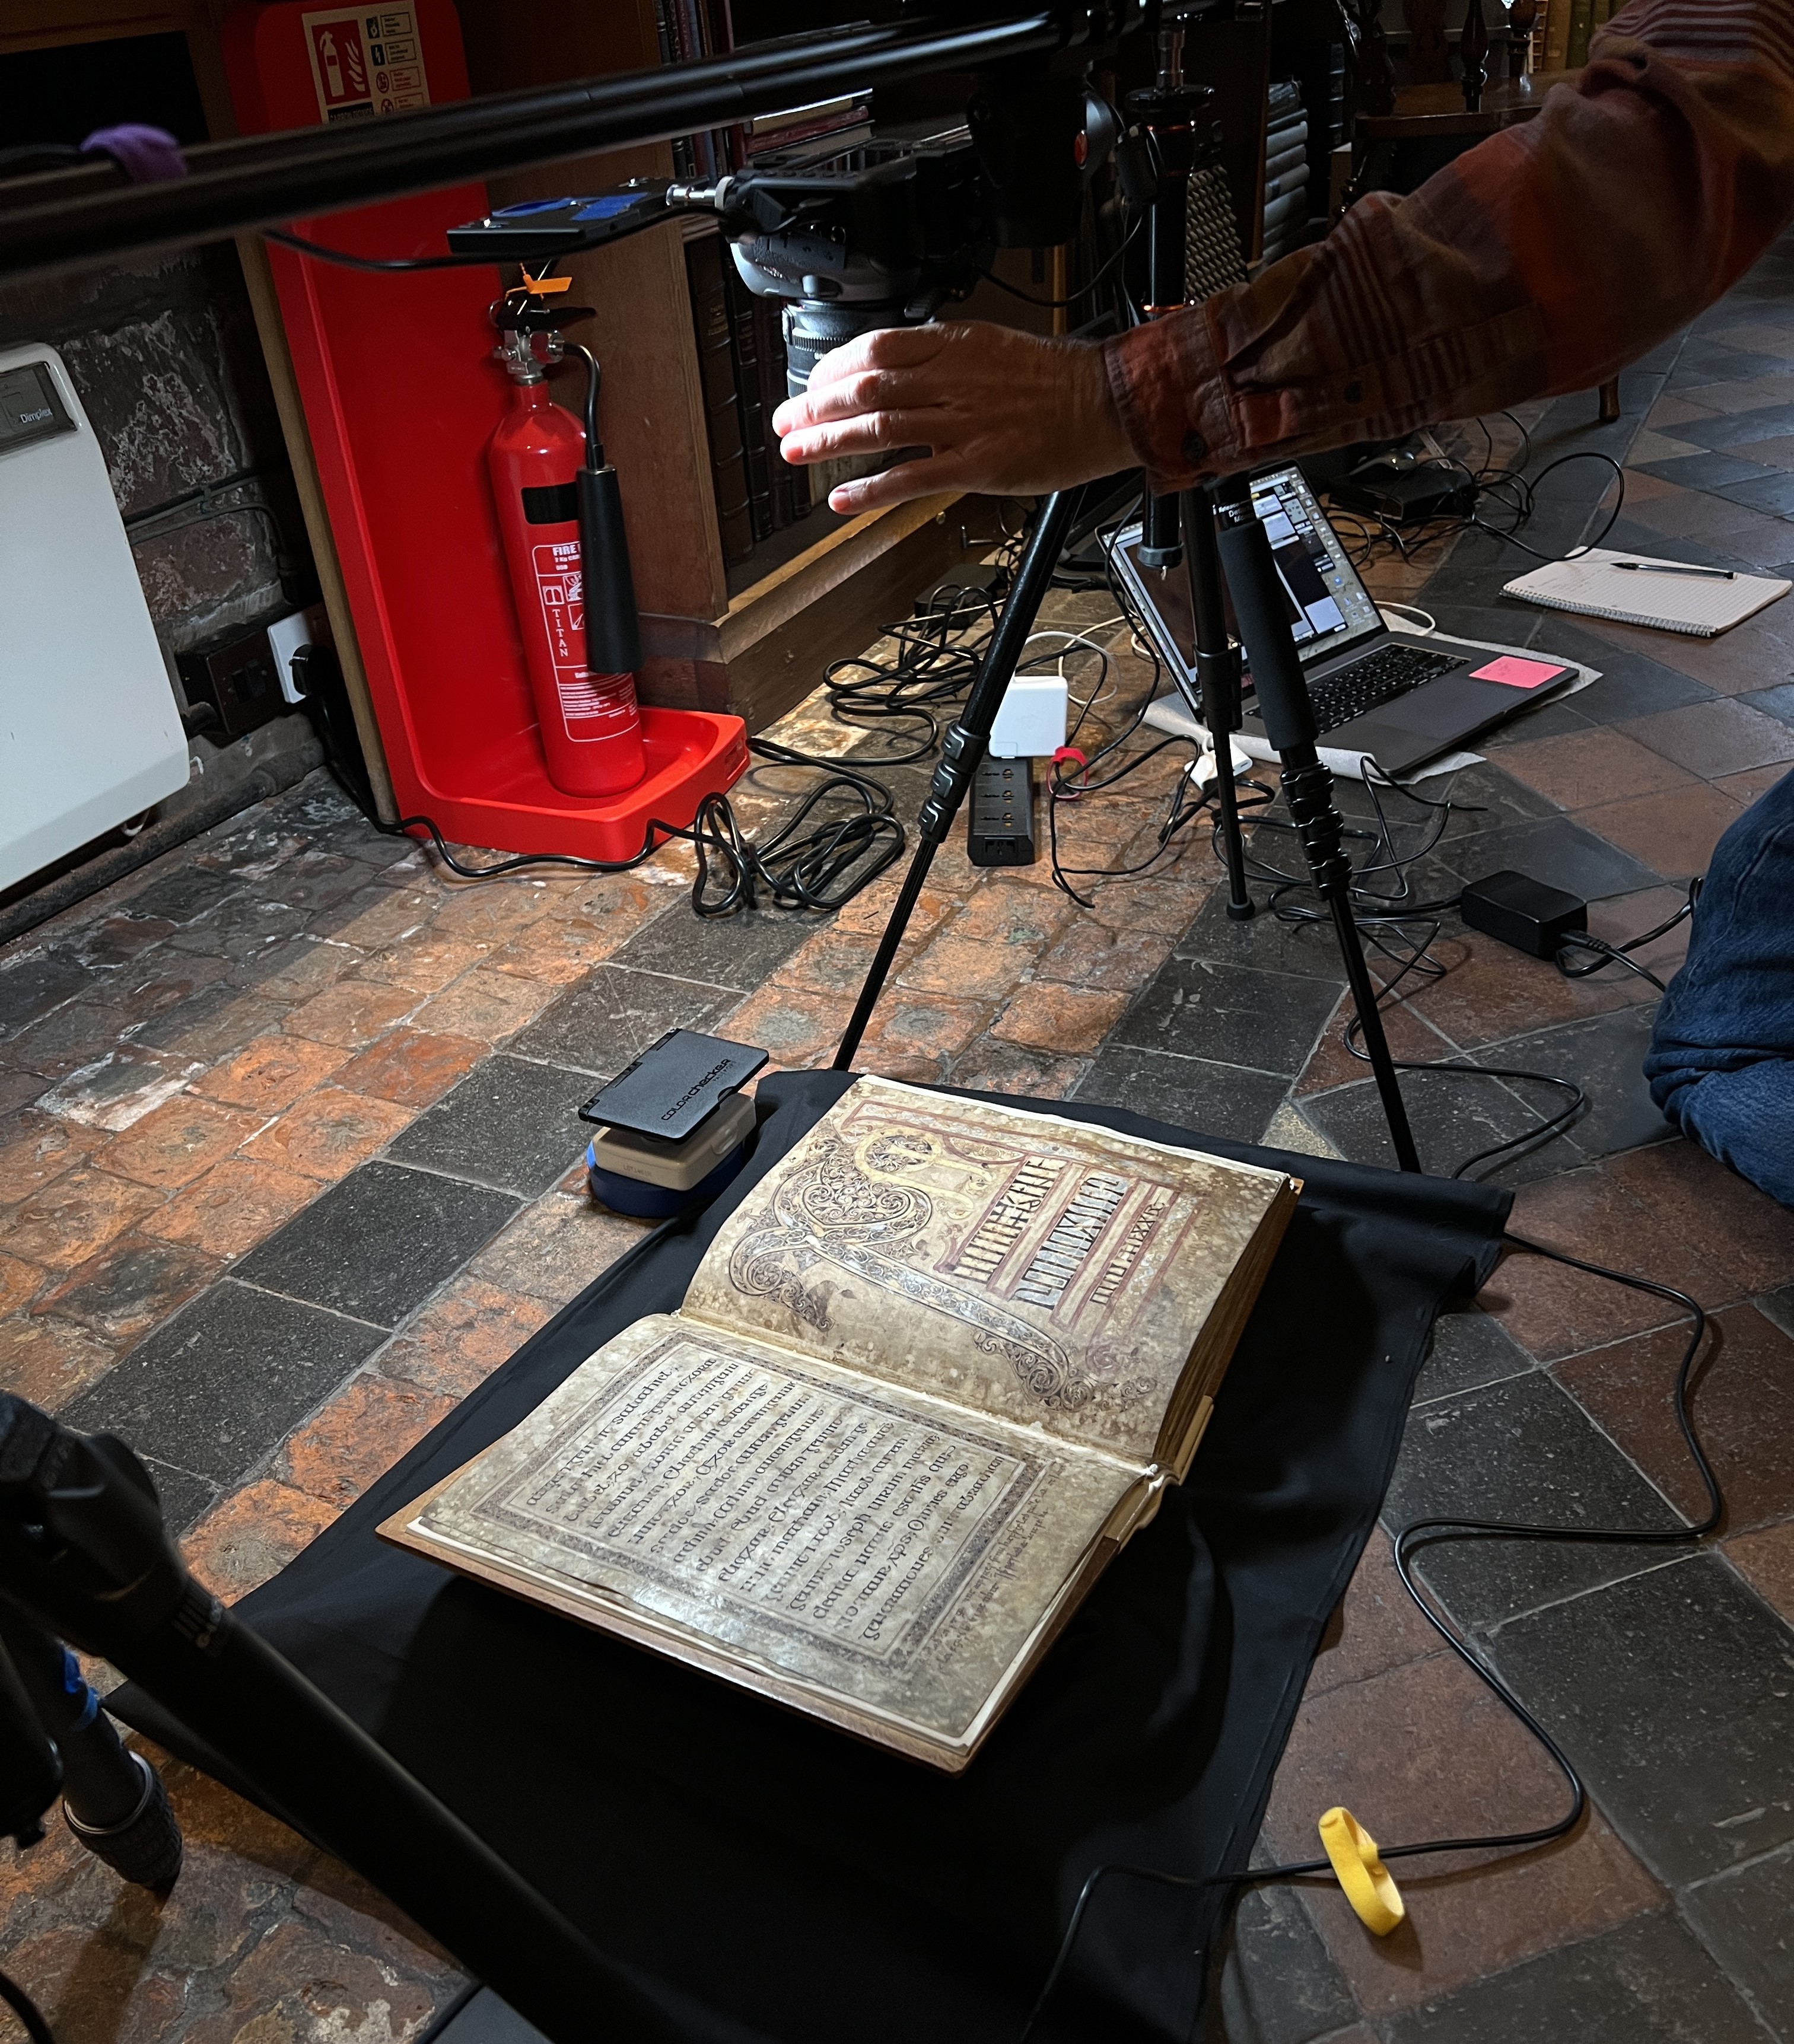 Focusing a camera lens over head pages from the St. Chad Gospels